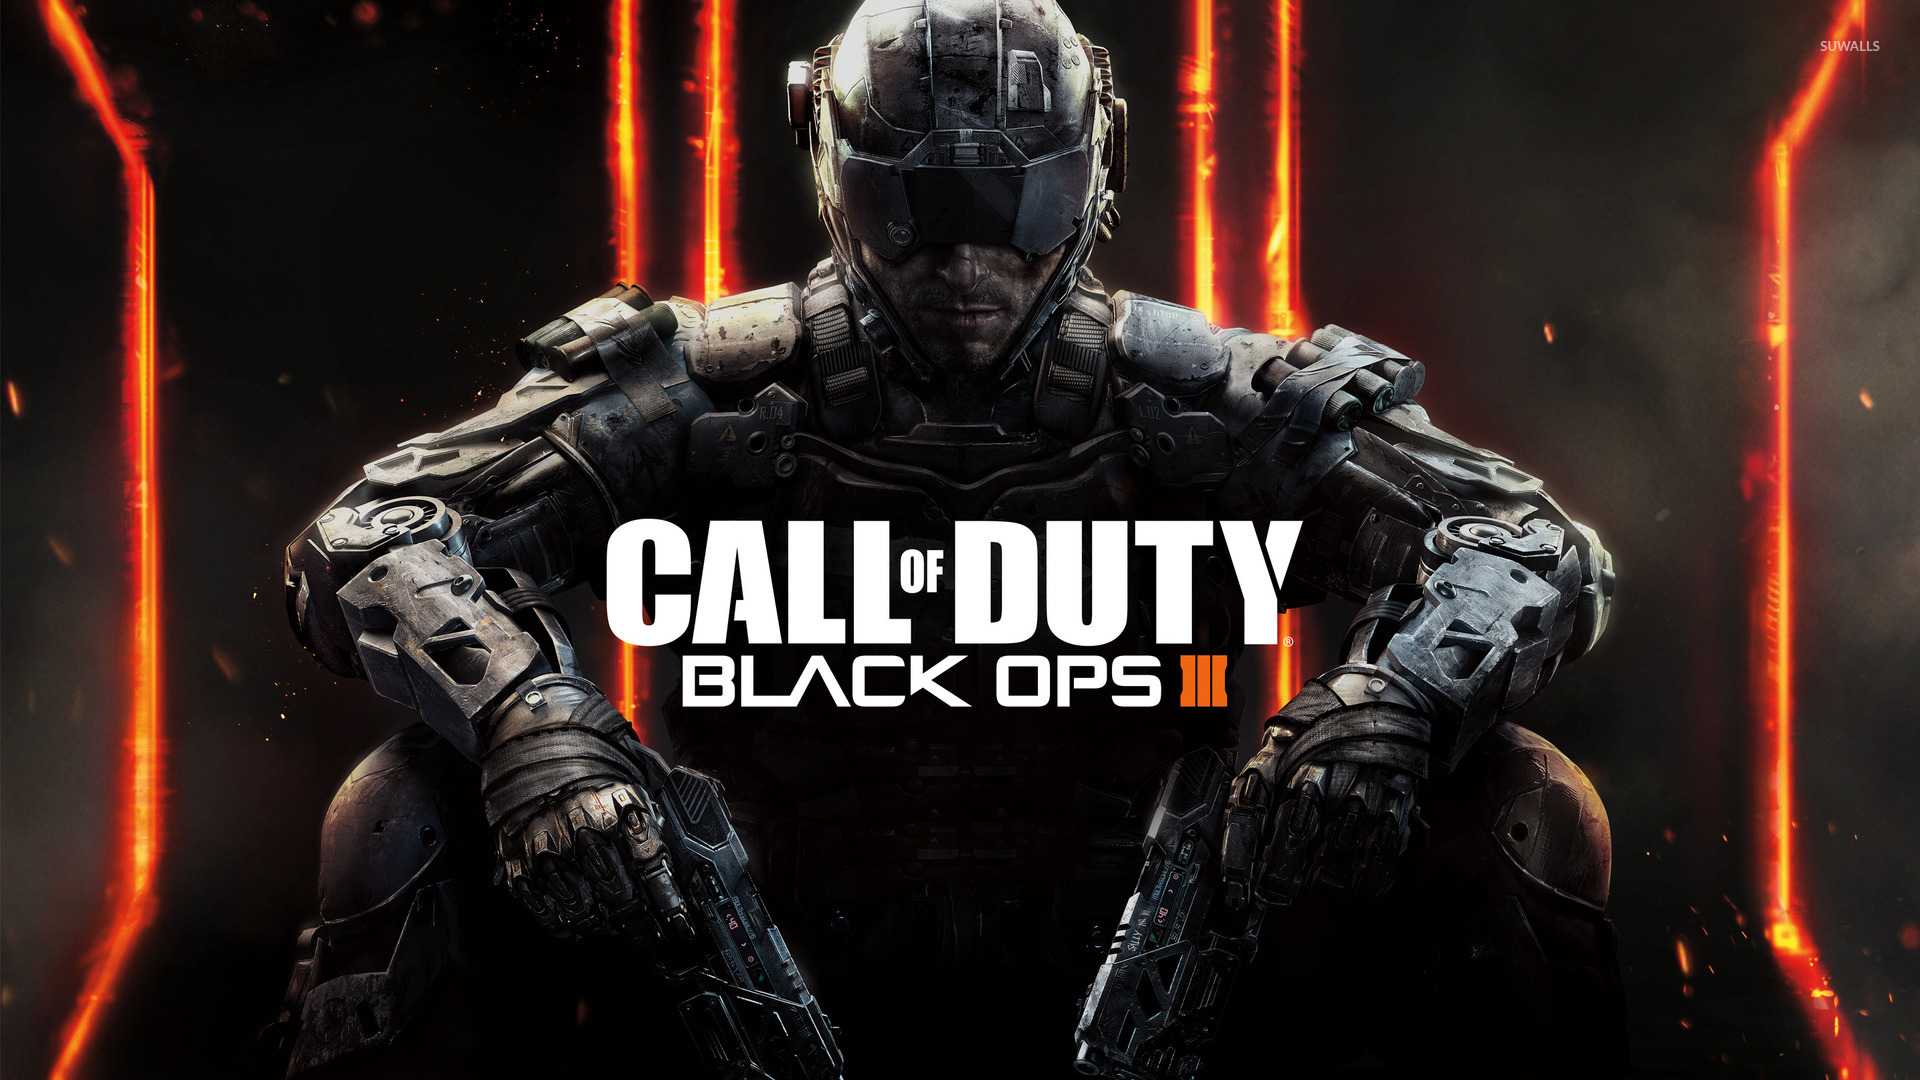 Call Of Duty Black Ops Iii Wallpaper Game